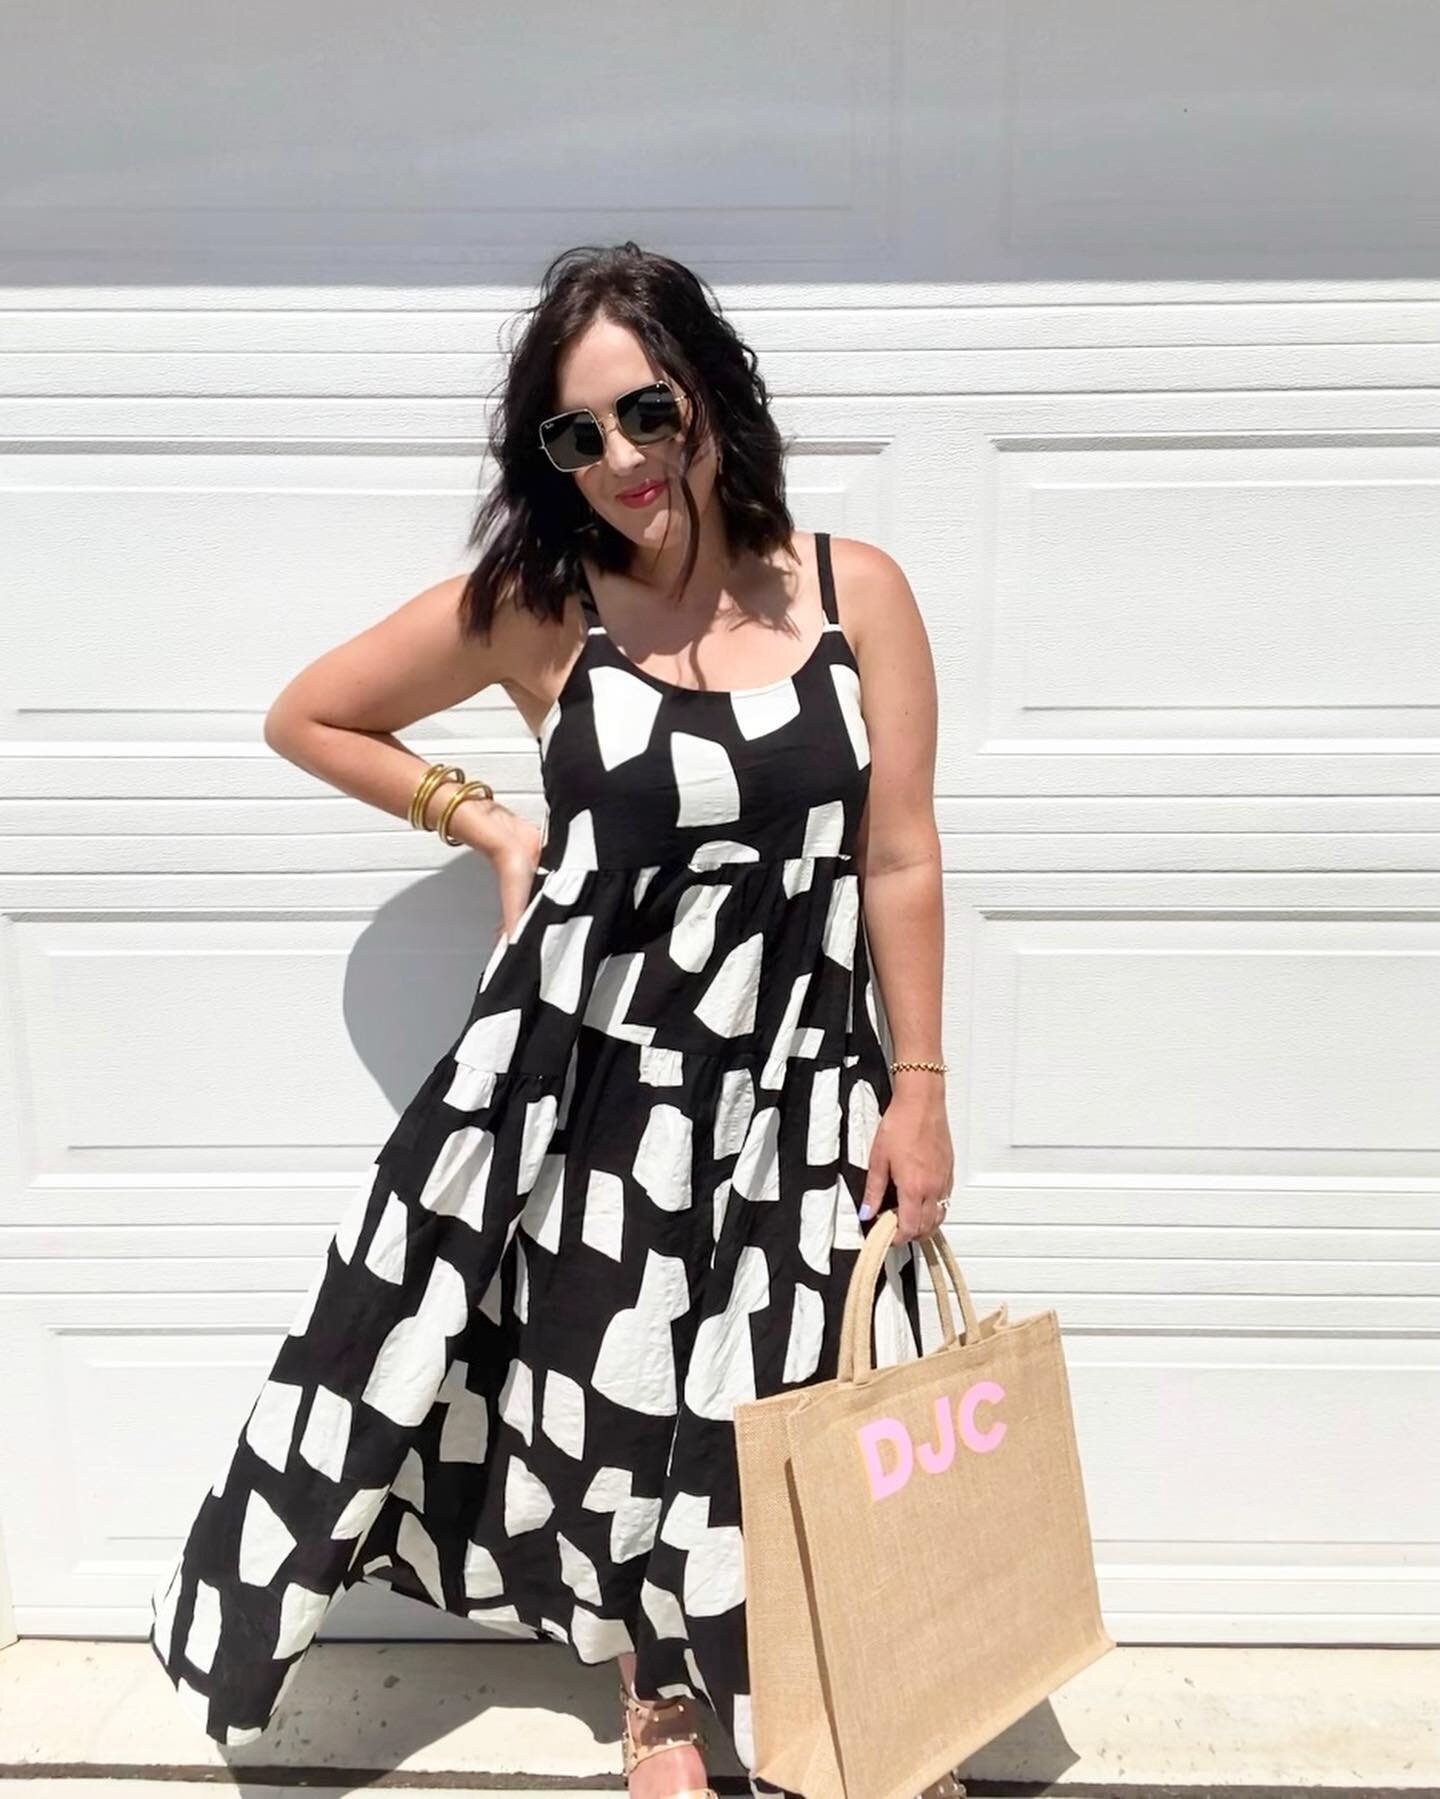 Garage pics are now a thing here at DK 💁🏻&zwj;♀️

Fri-Yay&rsquo;s @amazon find 👇🏼

&gt;&gt;&gt; Man OHH man was I wowed when I put this $25 dress on! The fit is flowy perfection! Runs TTS ++ @amazonprimeusa!! 

Soooo many print options! This was 